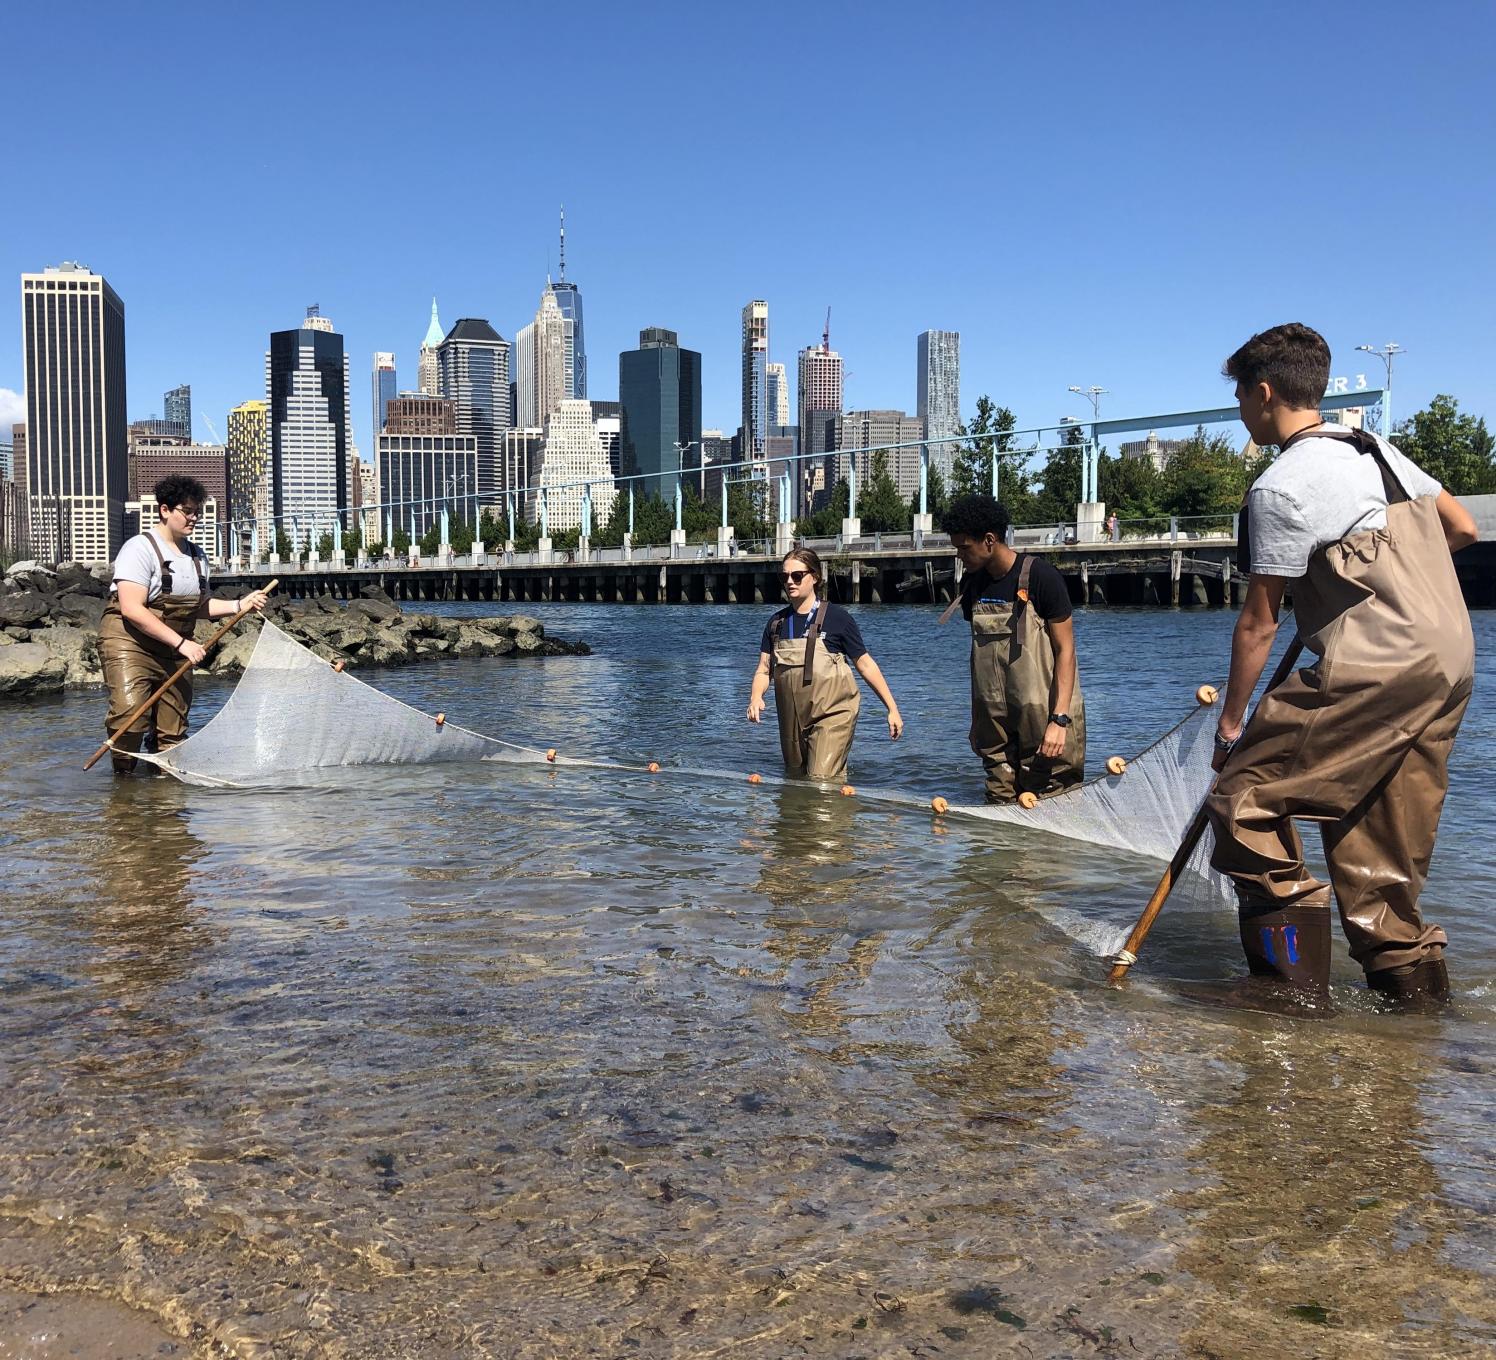 Teens in waders using a seine net in the water on a sunny day.